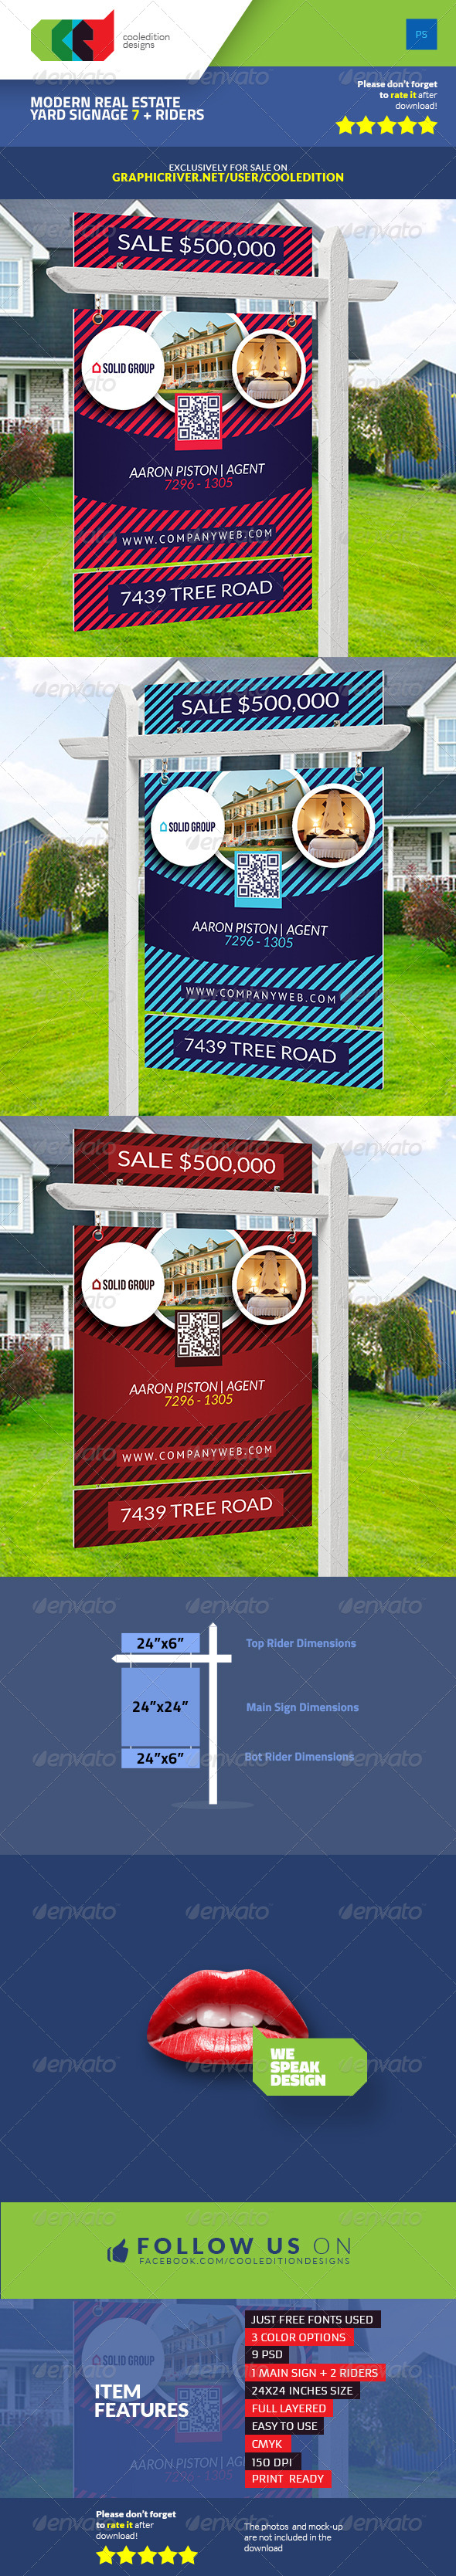 Download Modern Real Estate Yard Signage 7 Riders By Cooledition Graphicriver